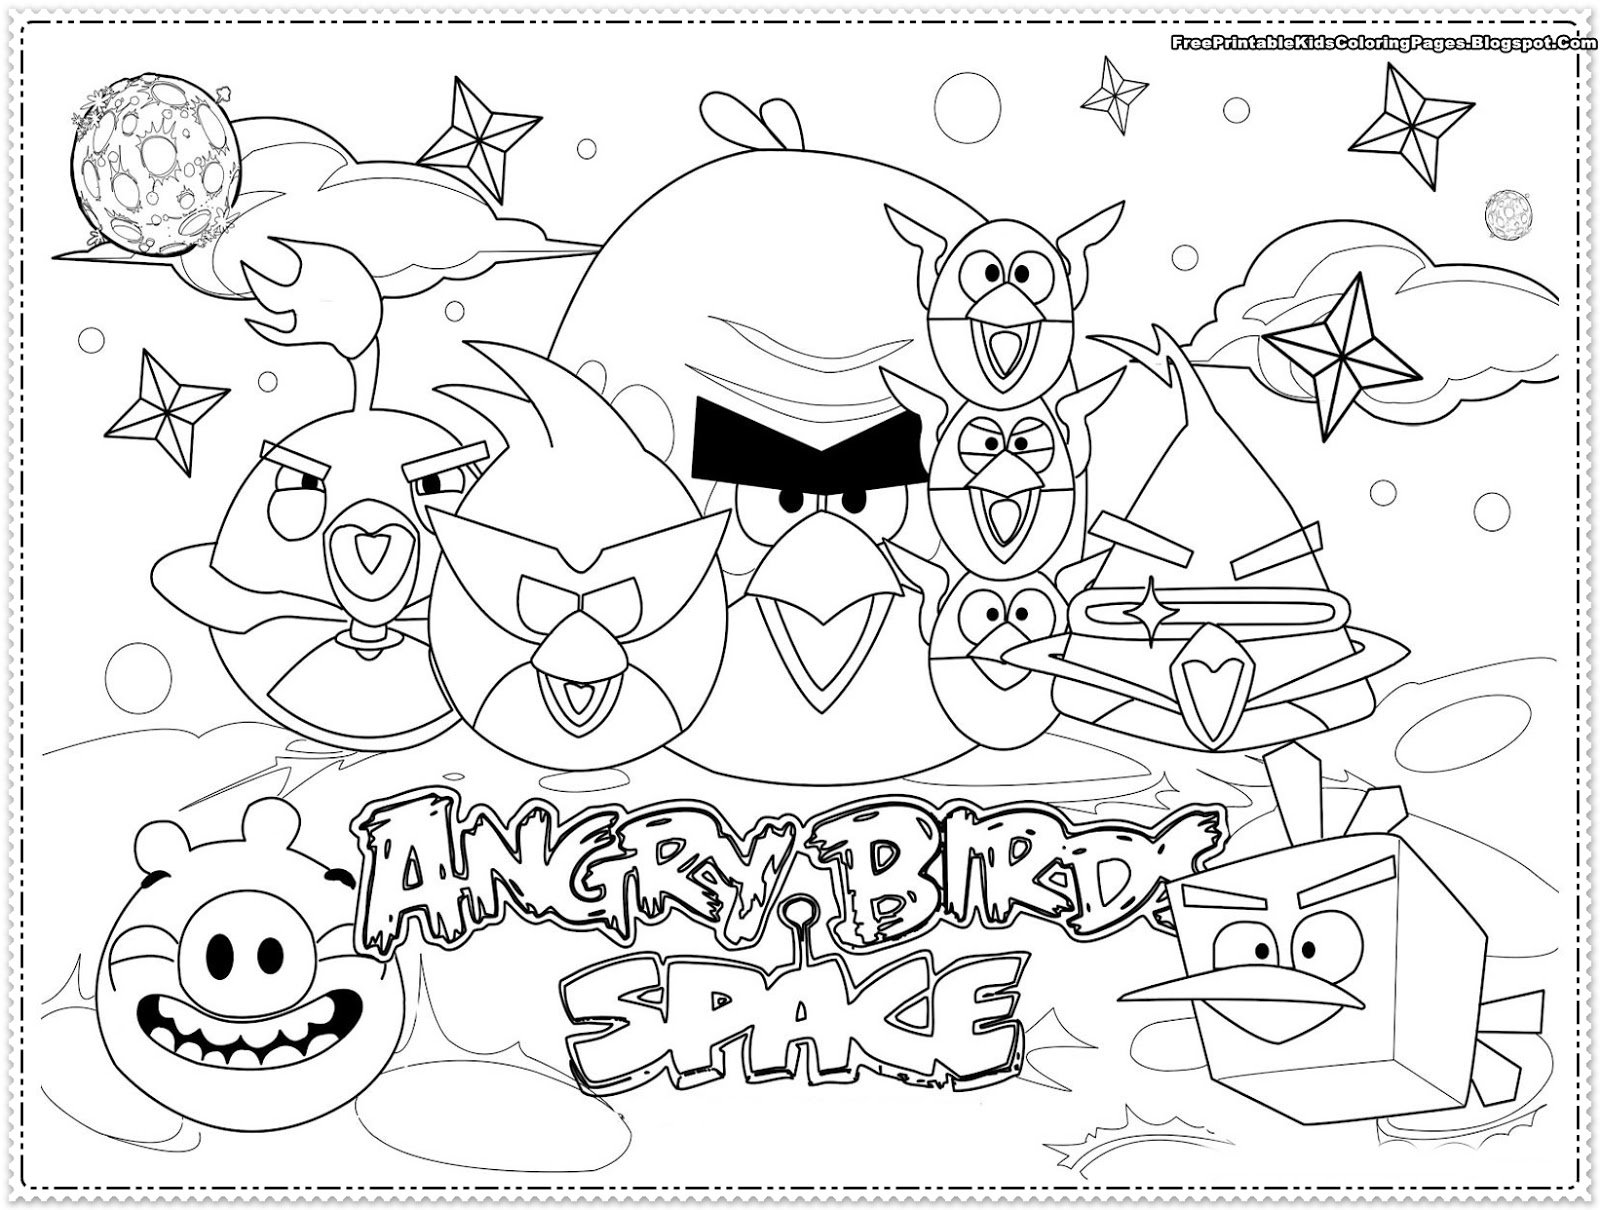  kids coloring pages to share on our free printable kids coloring pages